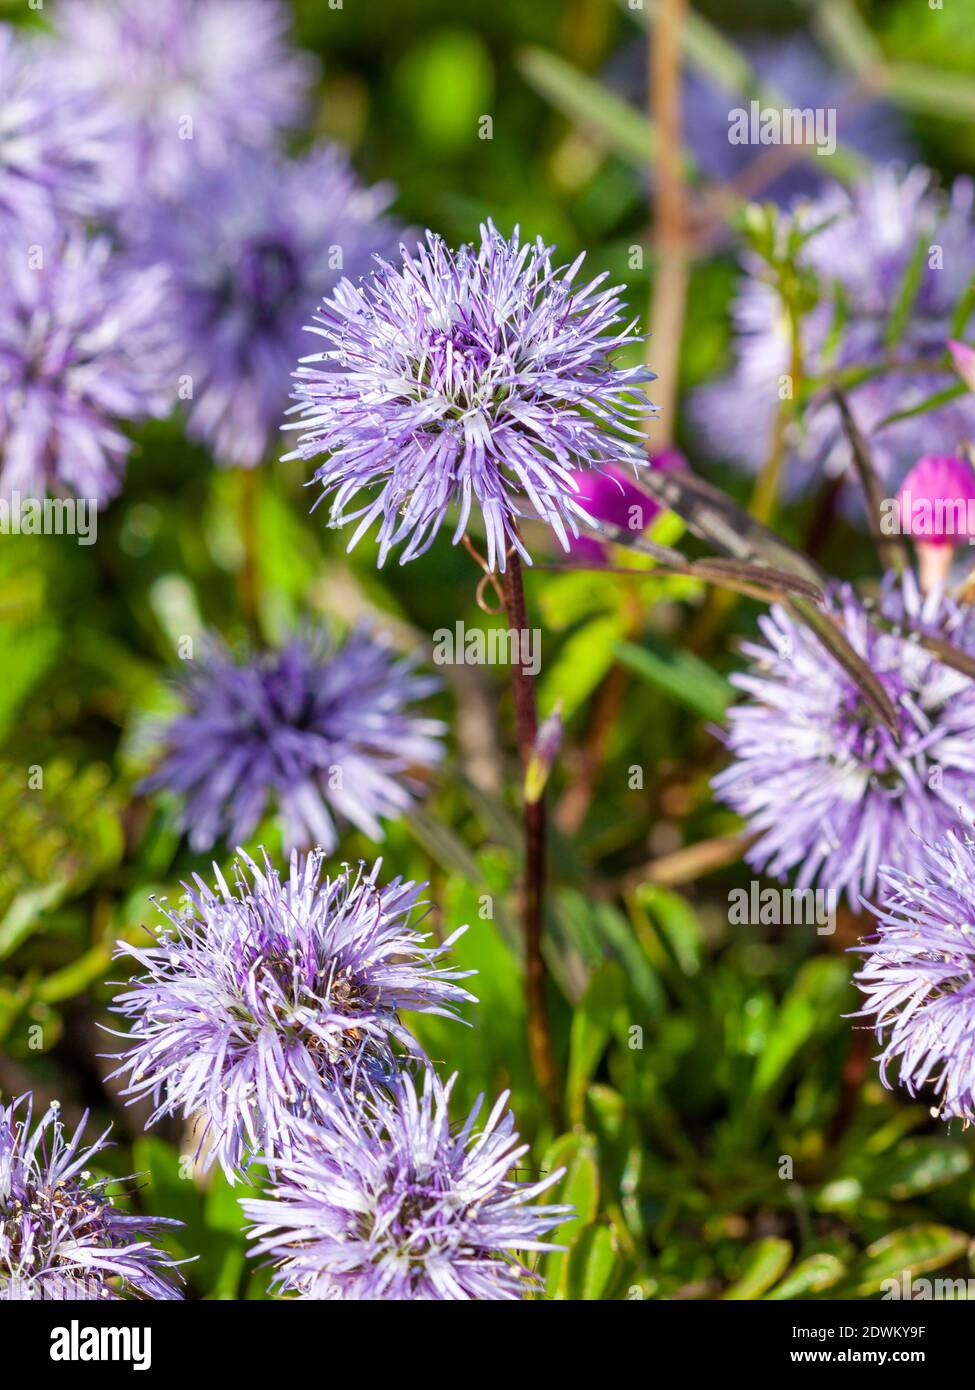 Globularia cordifolia a spring summer flowering plant with a blue purple summertime  flower commonly known as  Heart leaved glob daisy stock photo ima Stock Photo